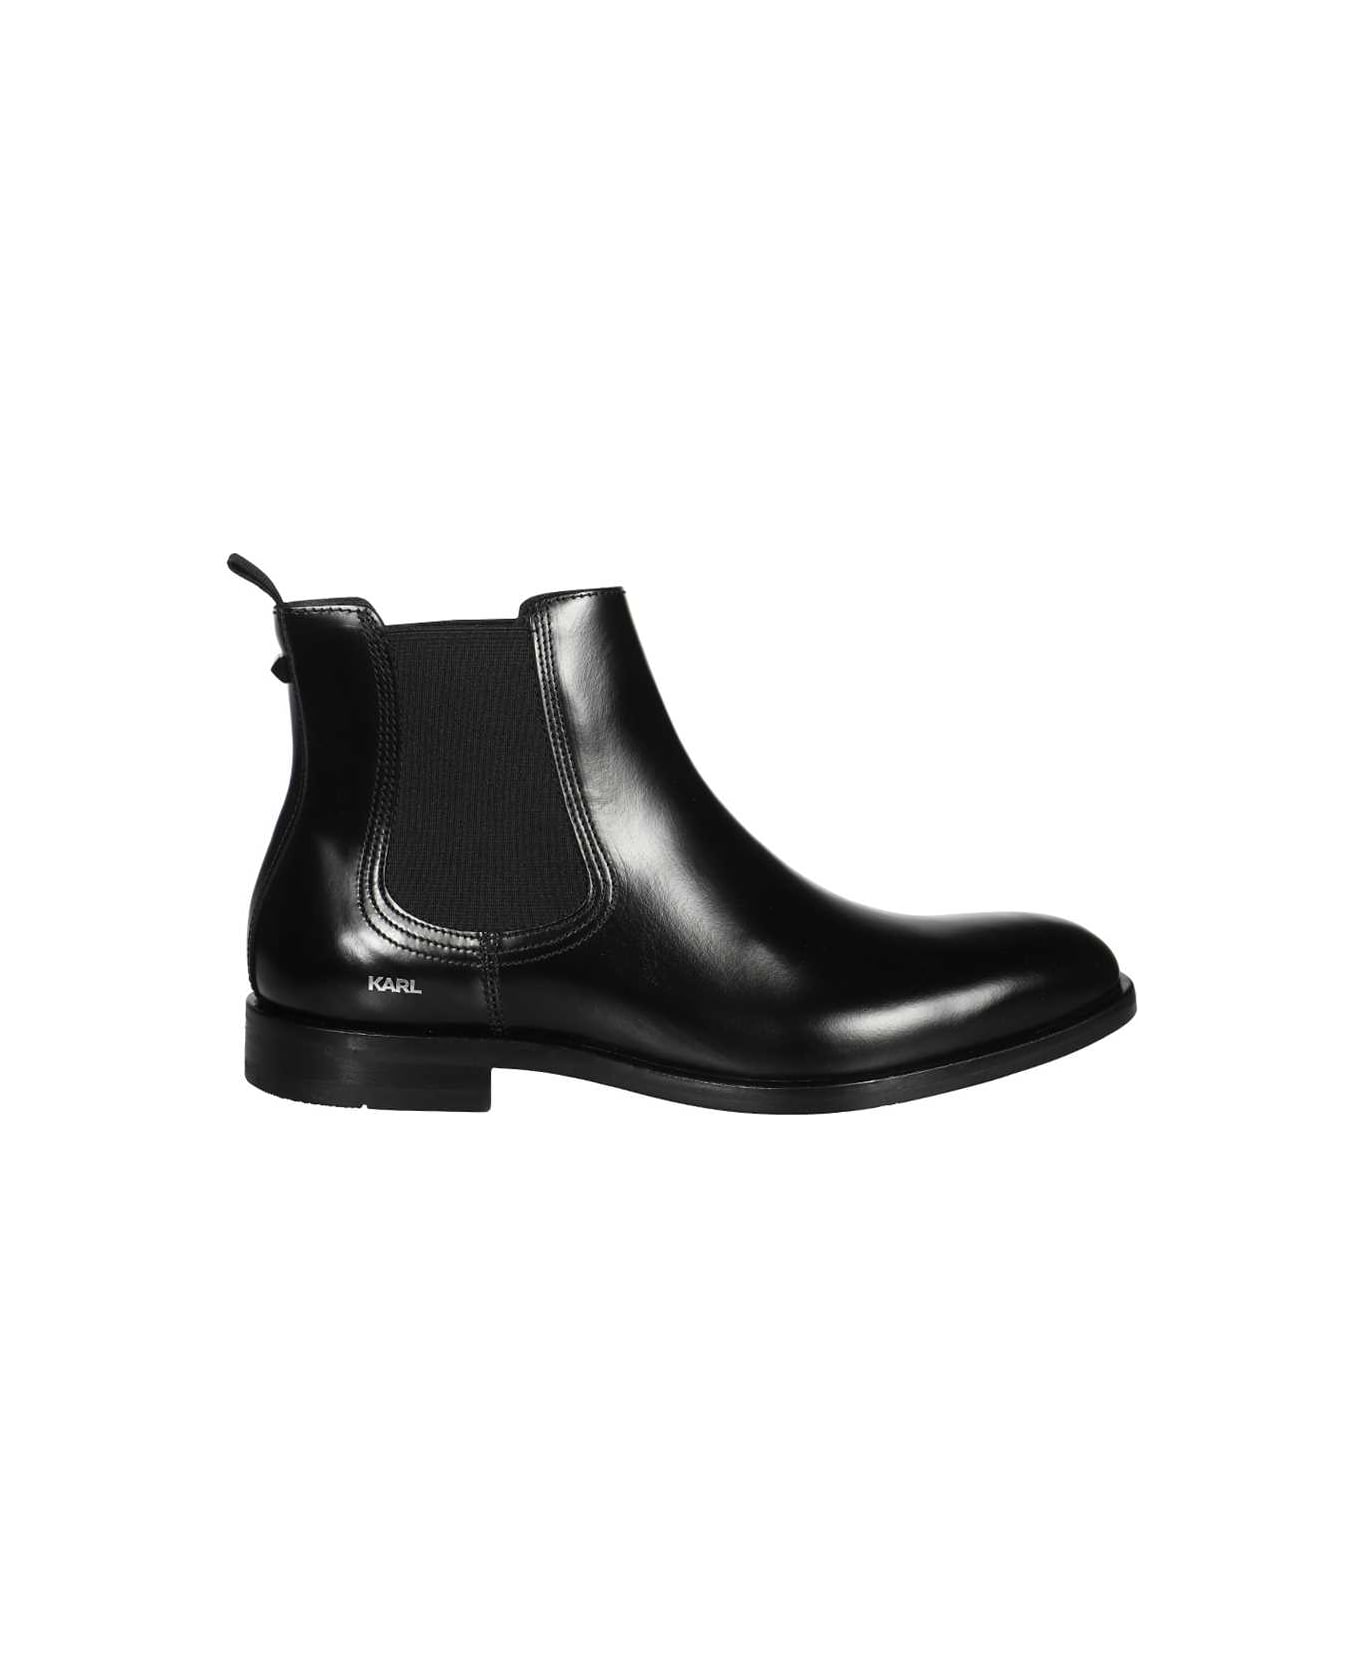 Karl Lagerfeld Leather Chelsea Boots - black ブーツ